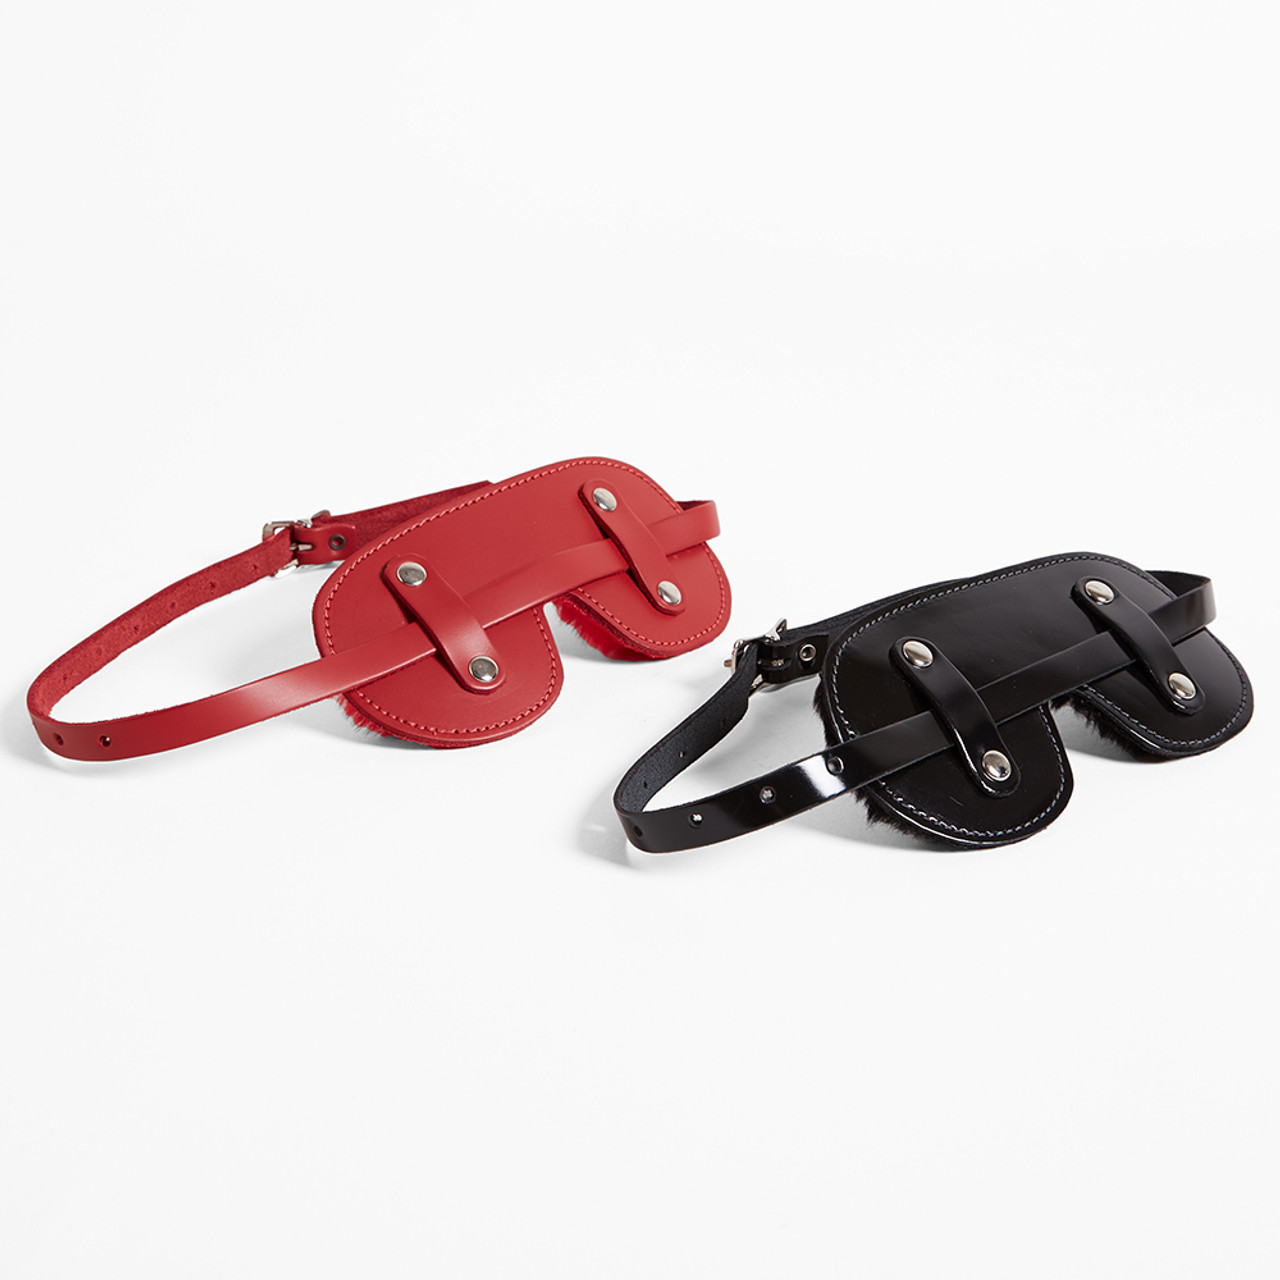 Patent Leather Blindfold with Fleece